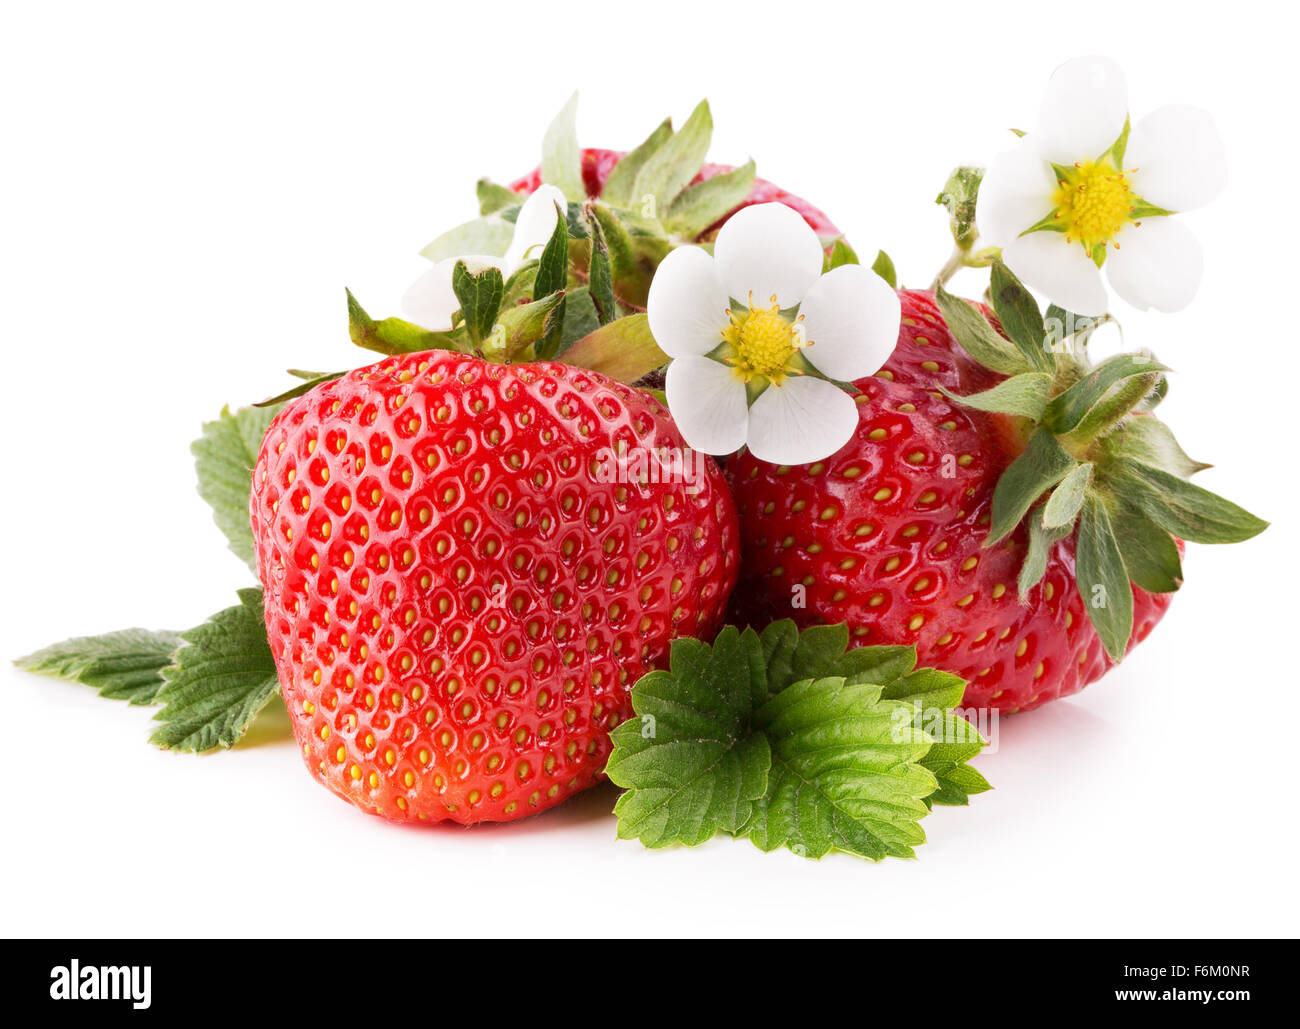 strawberries with flowers isolated on the white background. Stock Photo